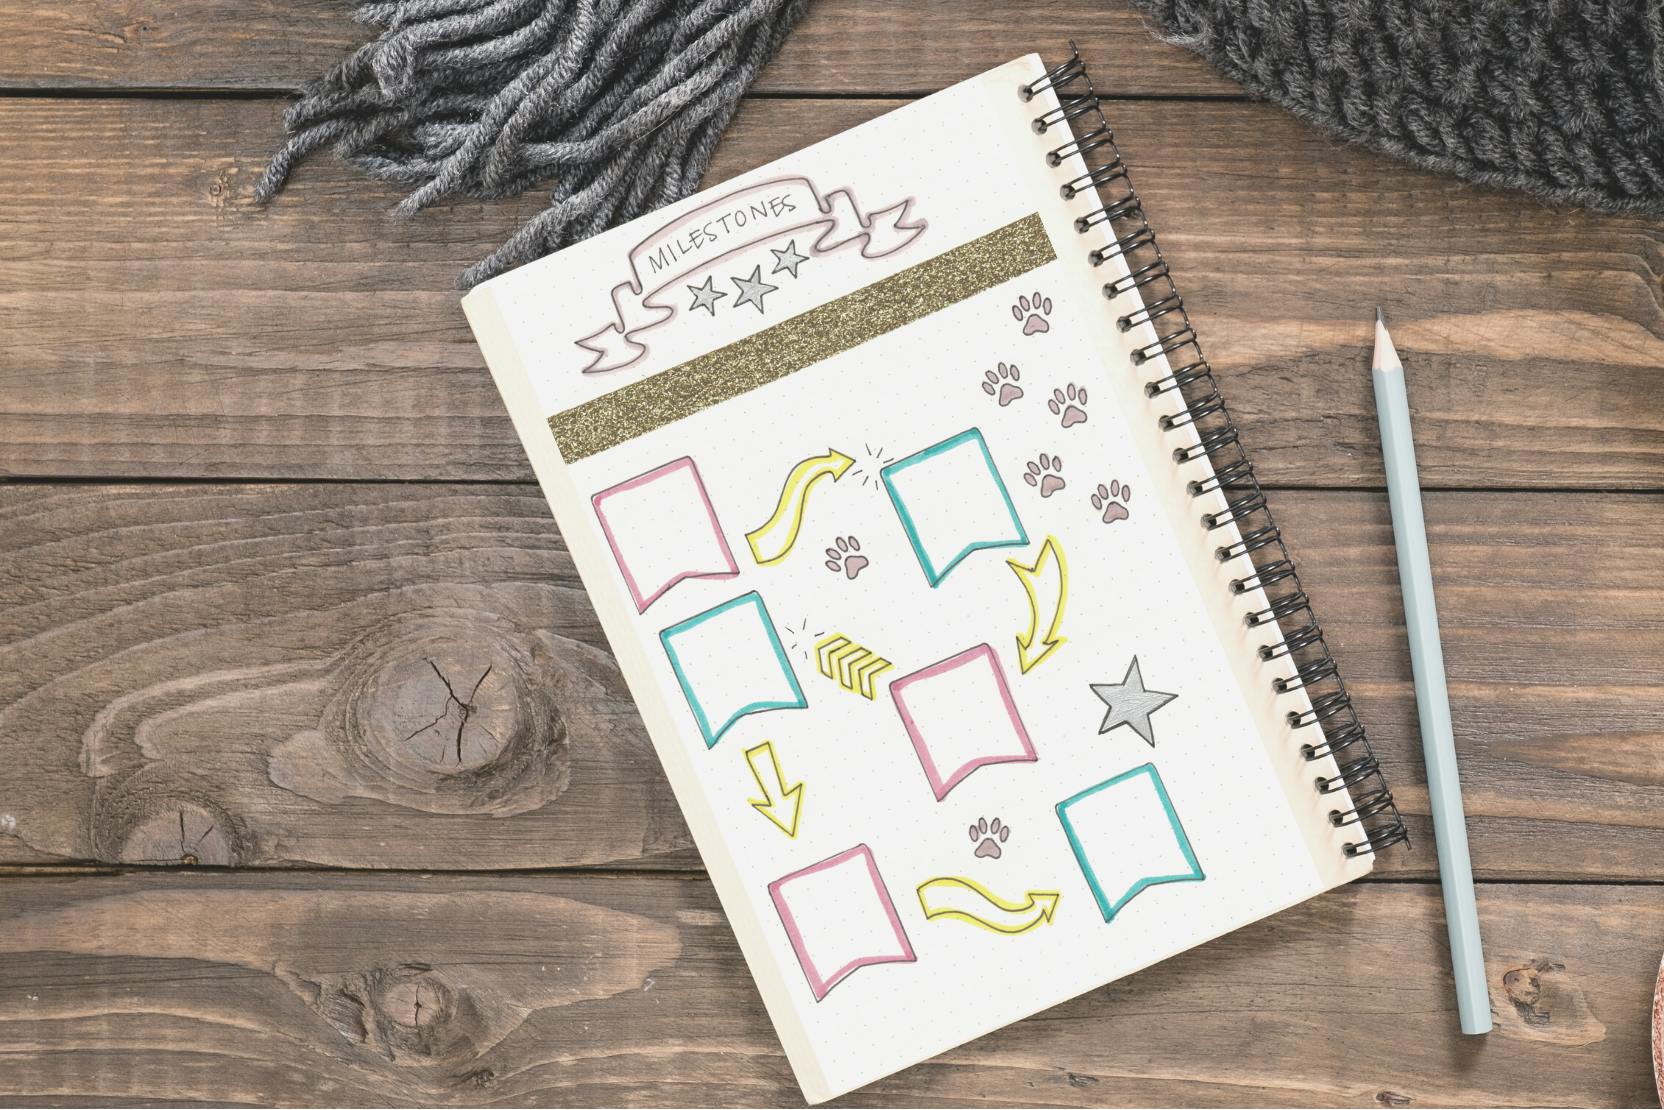 daily-wag-5-bullet-journal-spread-ideas-for-pets-hero-image